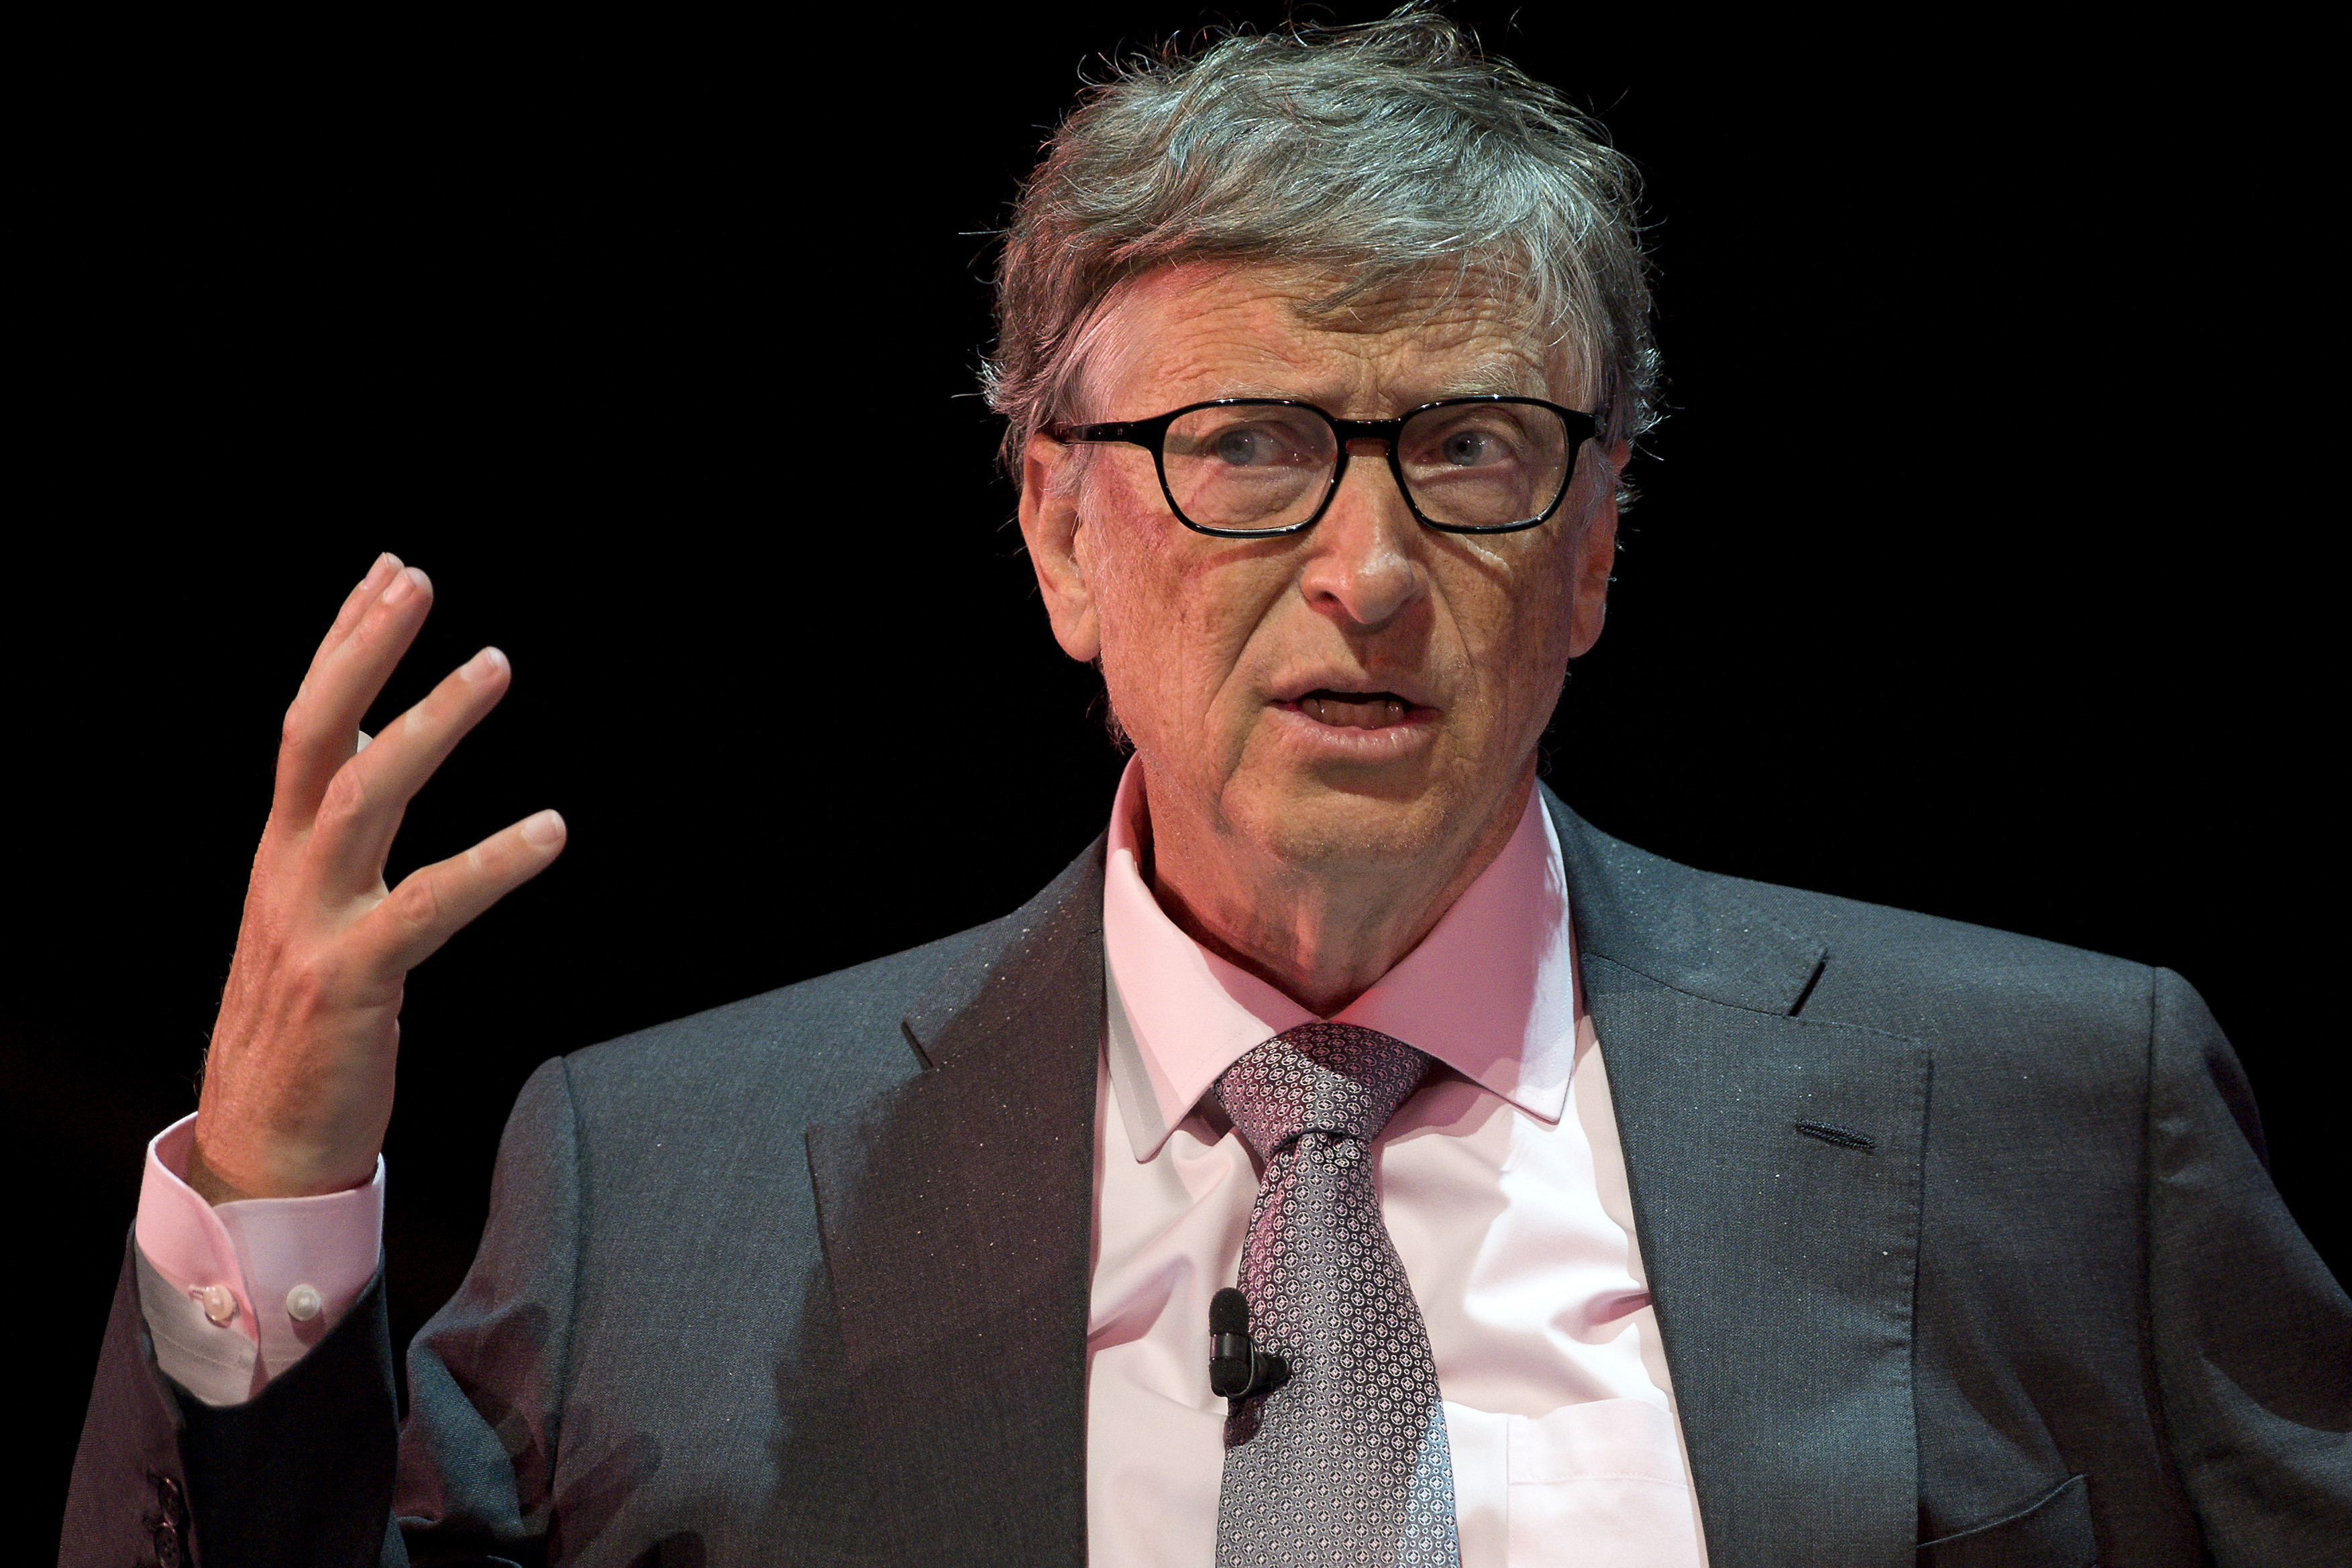 US philanthropist Bill Gates, of the Bill & Melinda Gates Foundation speaks at the Grand Challenges Annual Meeting 2016 in central London on October 26, 2016. US philanthropist Bill Gates urged Britain on Wednesday to step up investment in science and research as it prepares to leave the EU. Speaking at a conference in London attended by more than 1,000 scientists from around the world, Gates pledged to continue his own investment in British research and innovation, despite economic uncertainties surrounding Brexit. / AFP PHOTO / JUSTIN TALLIS